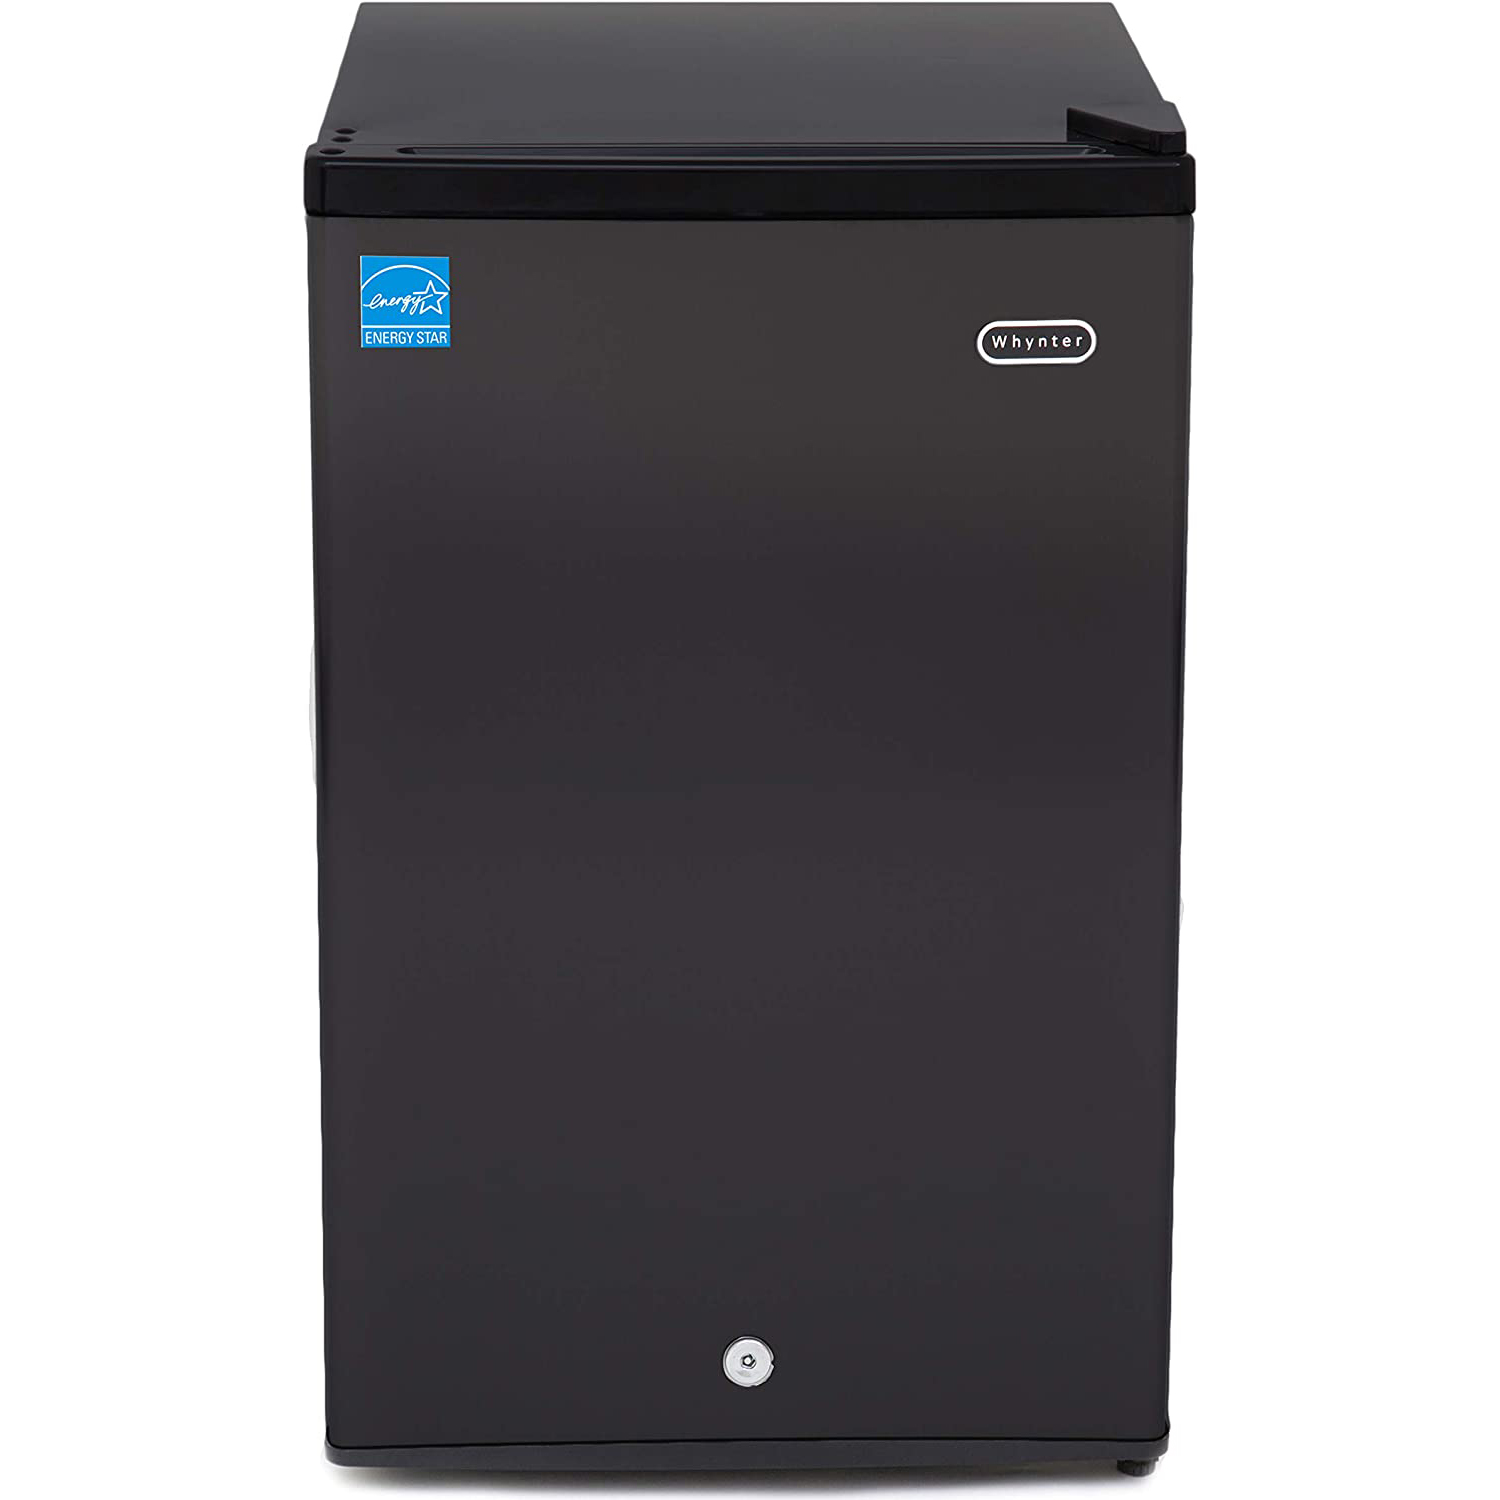 Photos - Wine Cooler Whynter CUF-301BK 3.0 Cubic feet Energy Star Upright Freezer with Lock - B